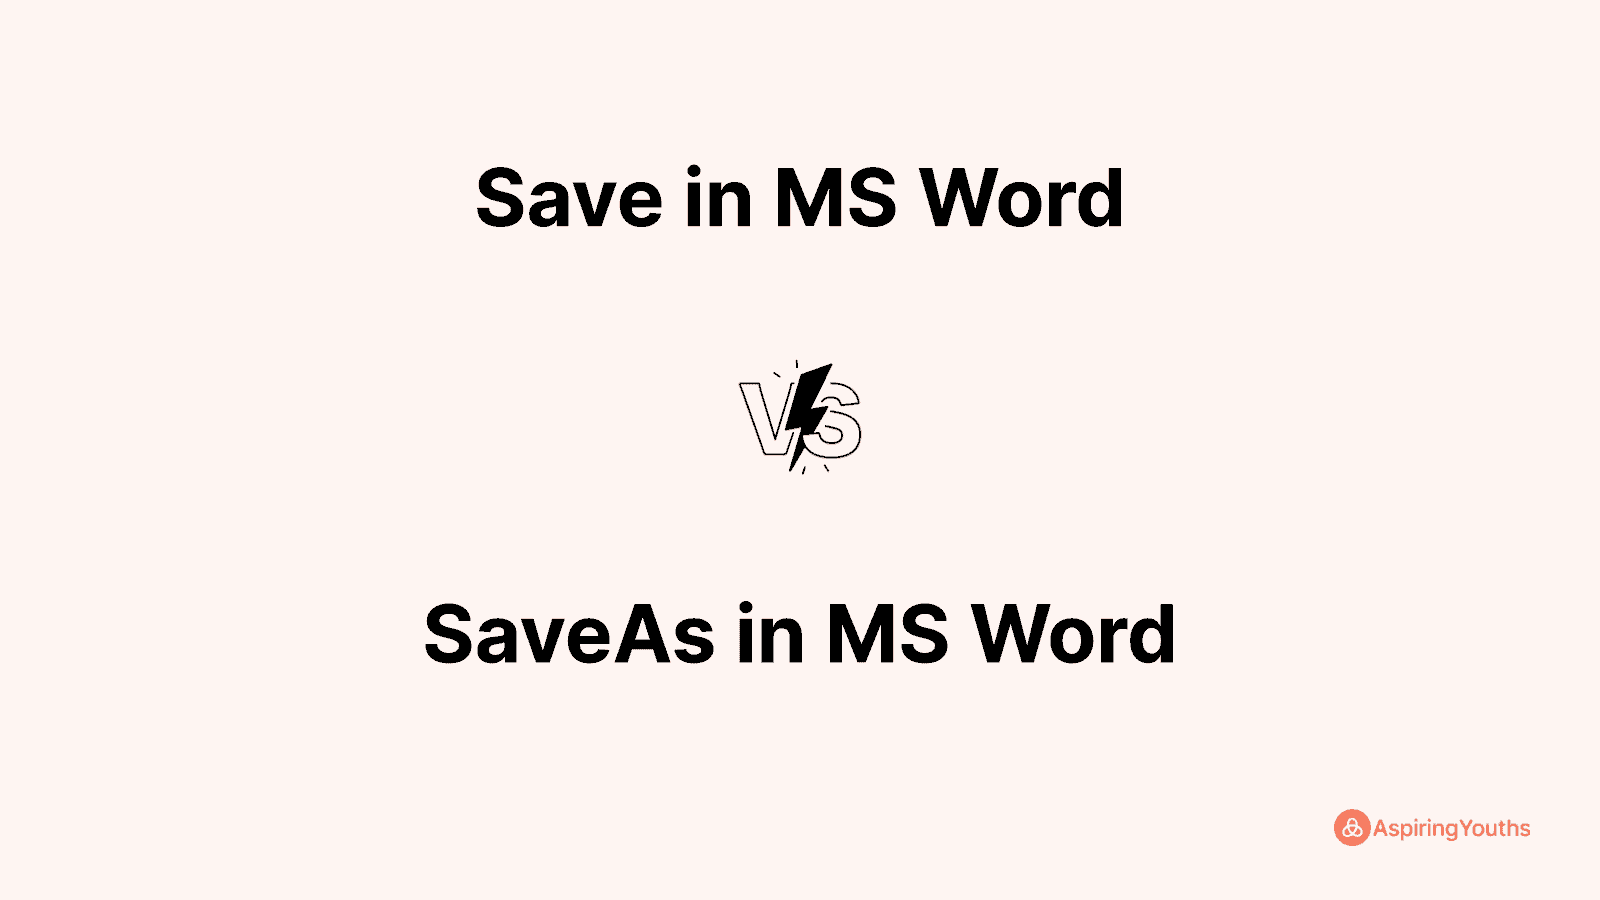 Save in MS Word vs SaveAs in MS Word